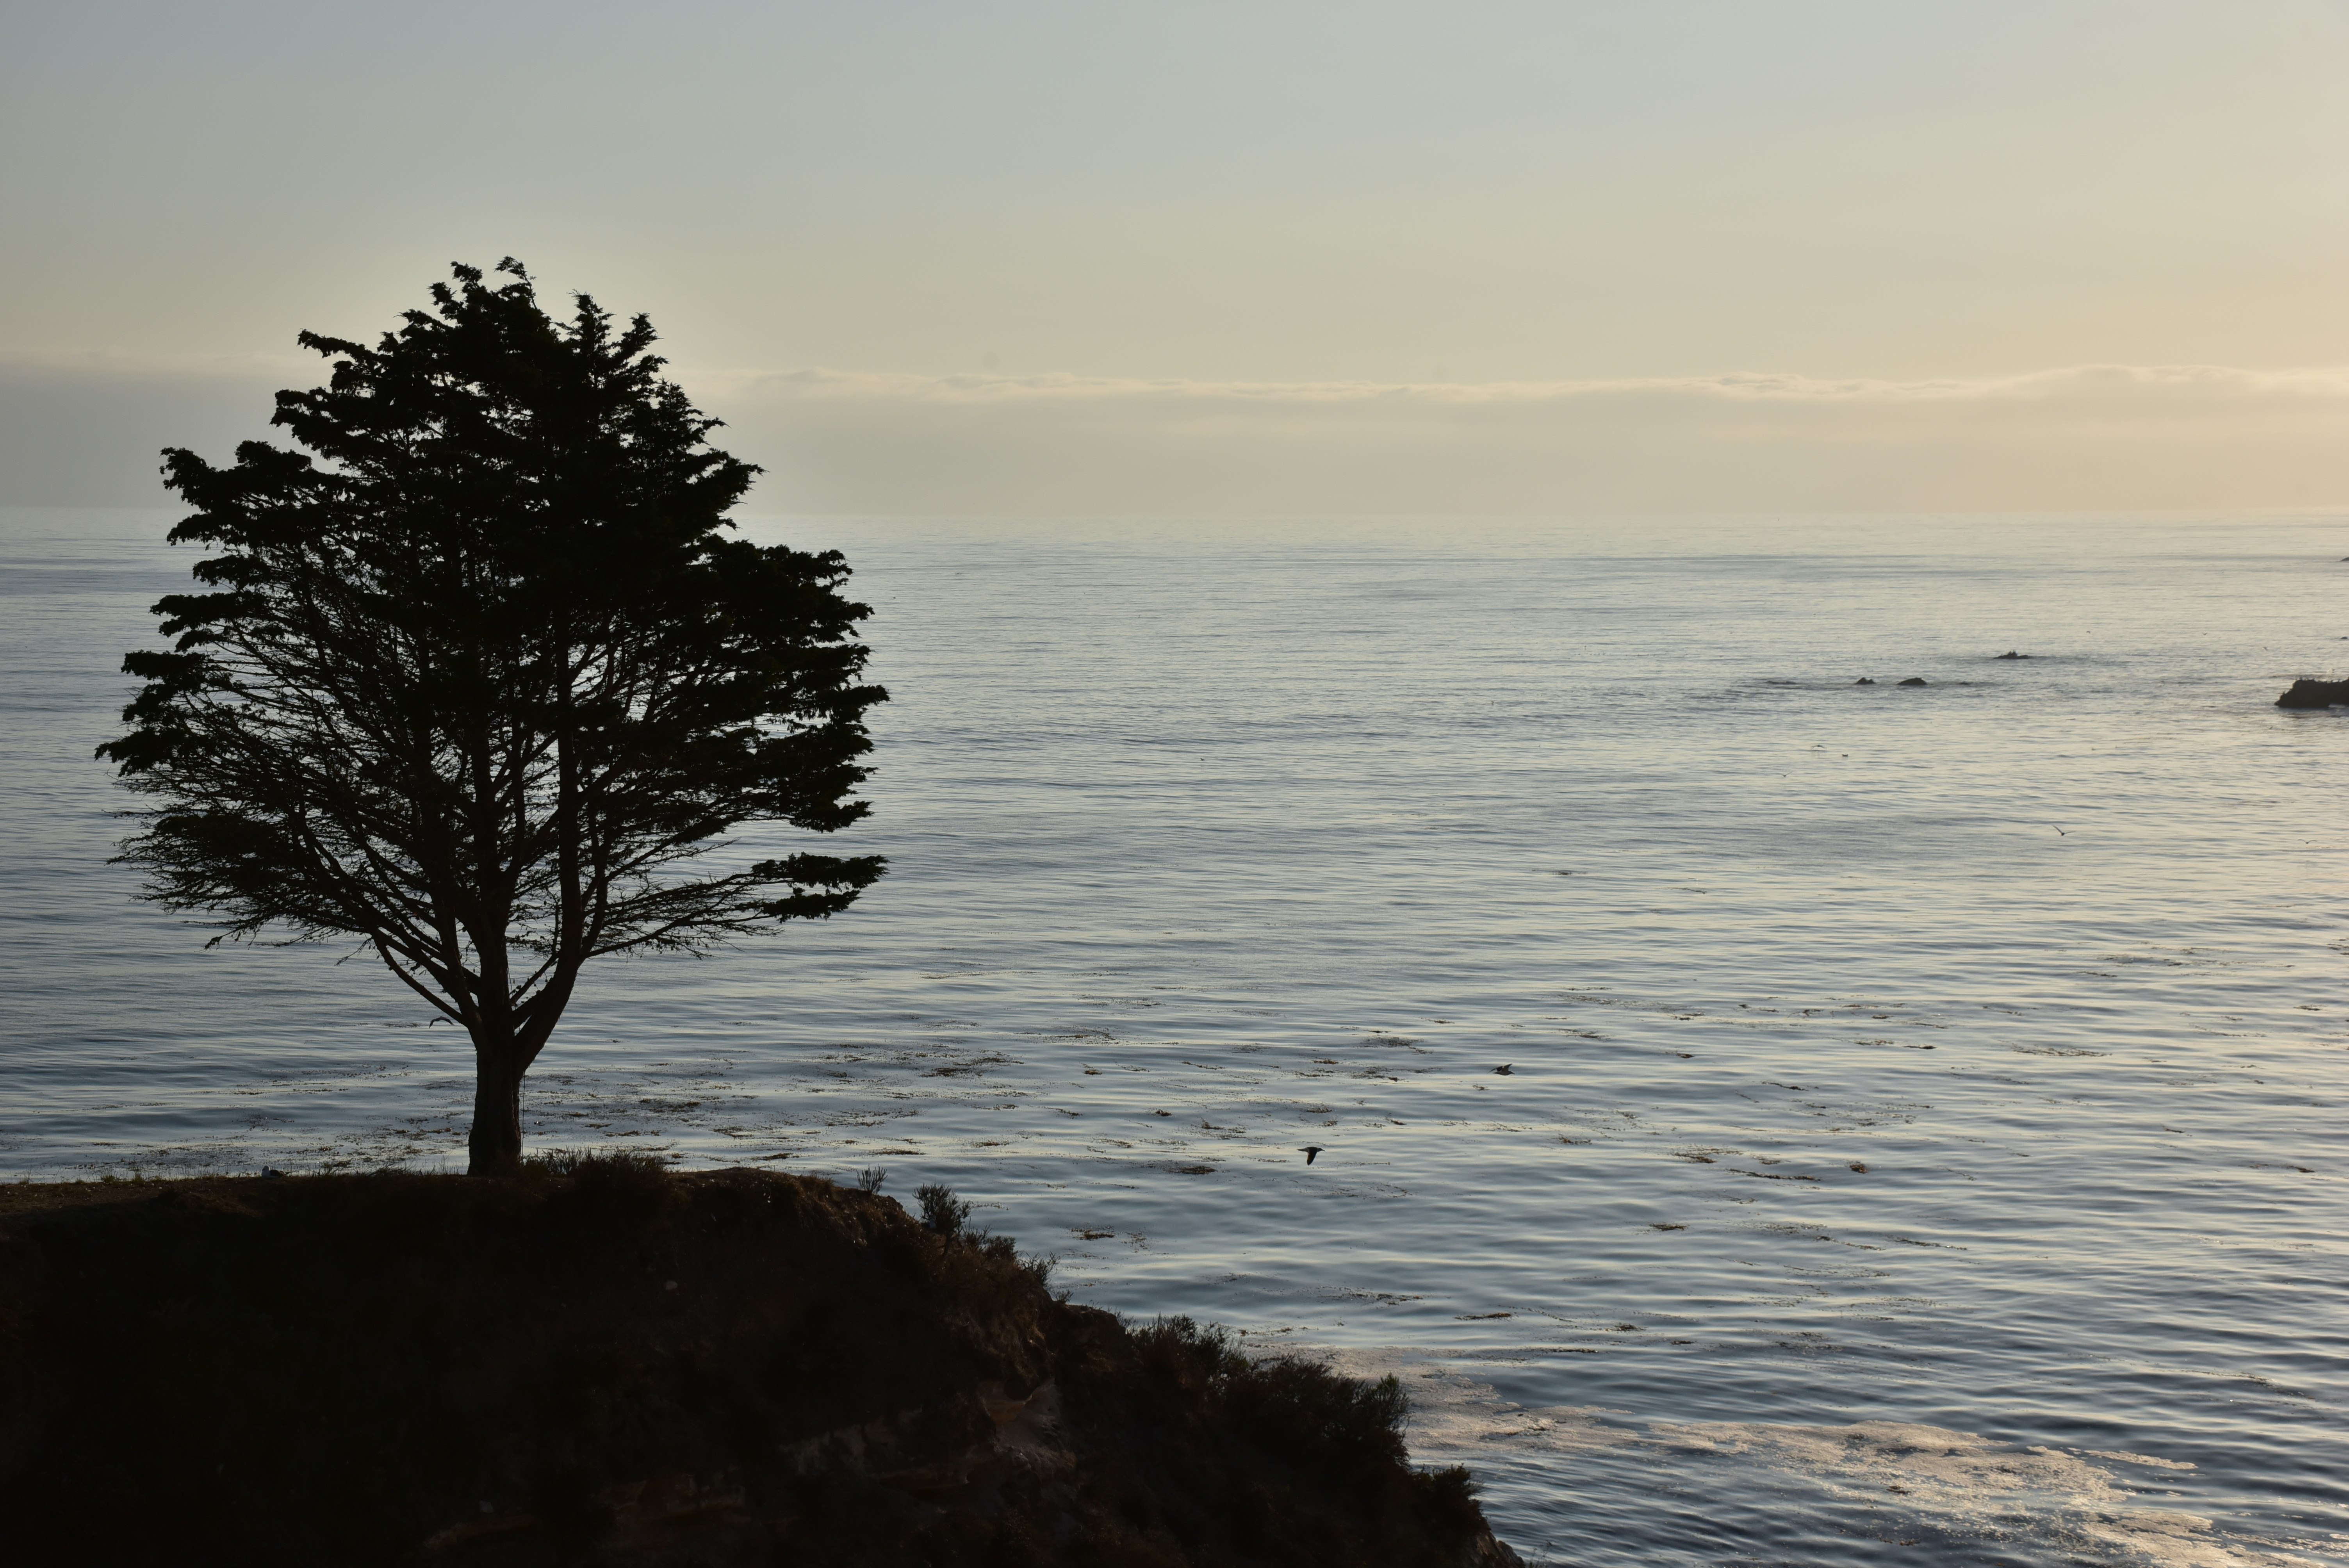 View of a tree on the bluff overlooking the Pacific Ocean
